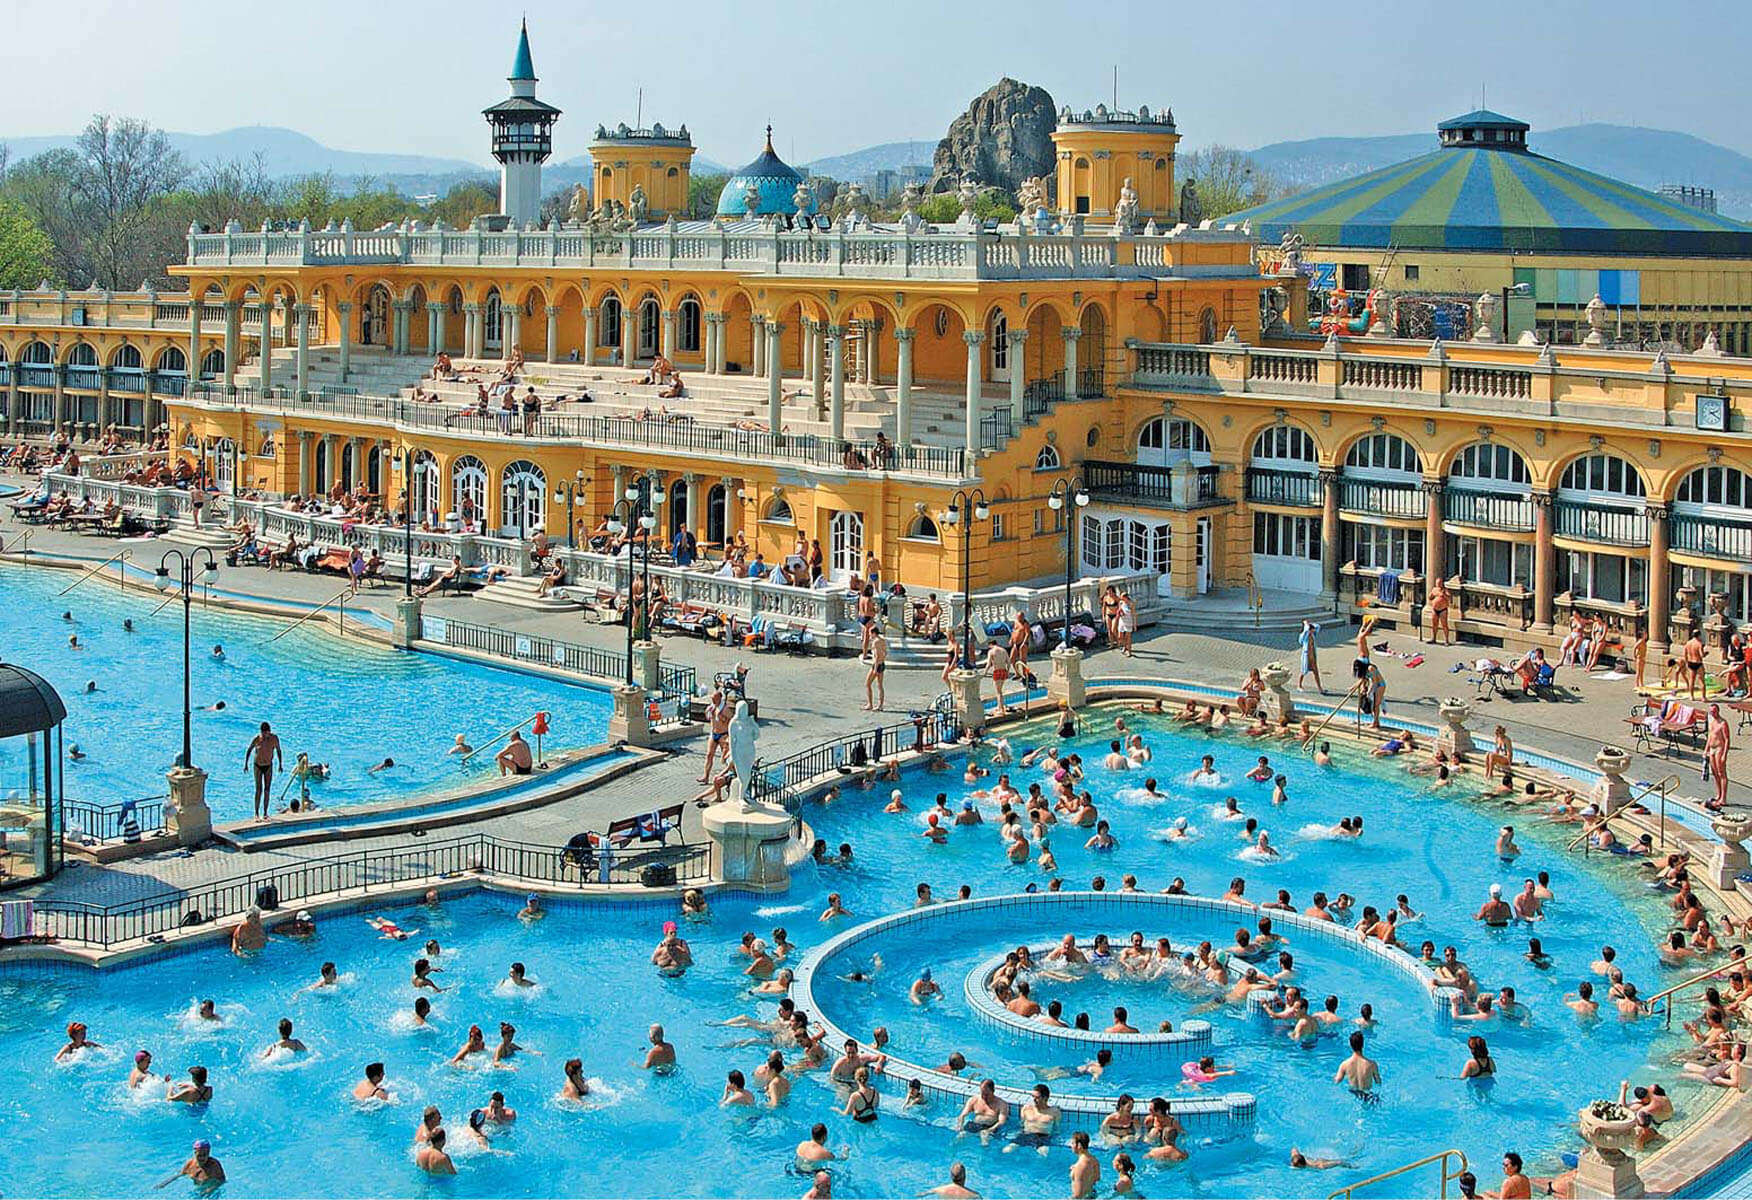 hundreds of people enjoying in an open pool